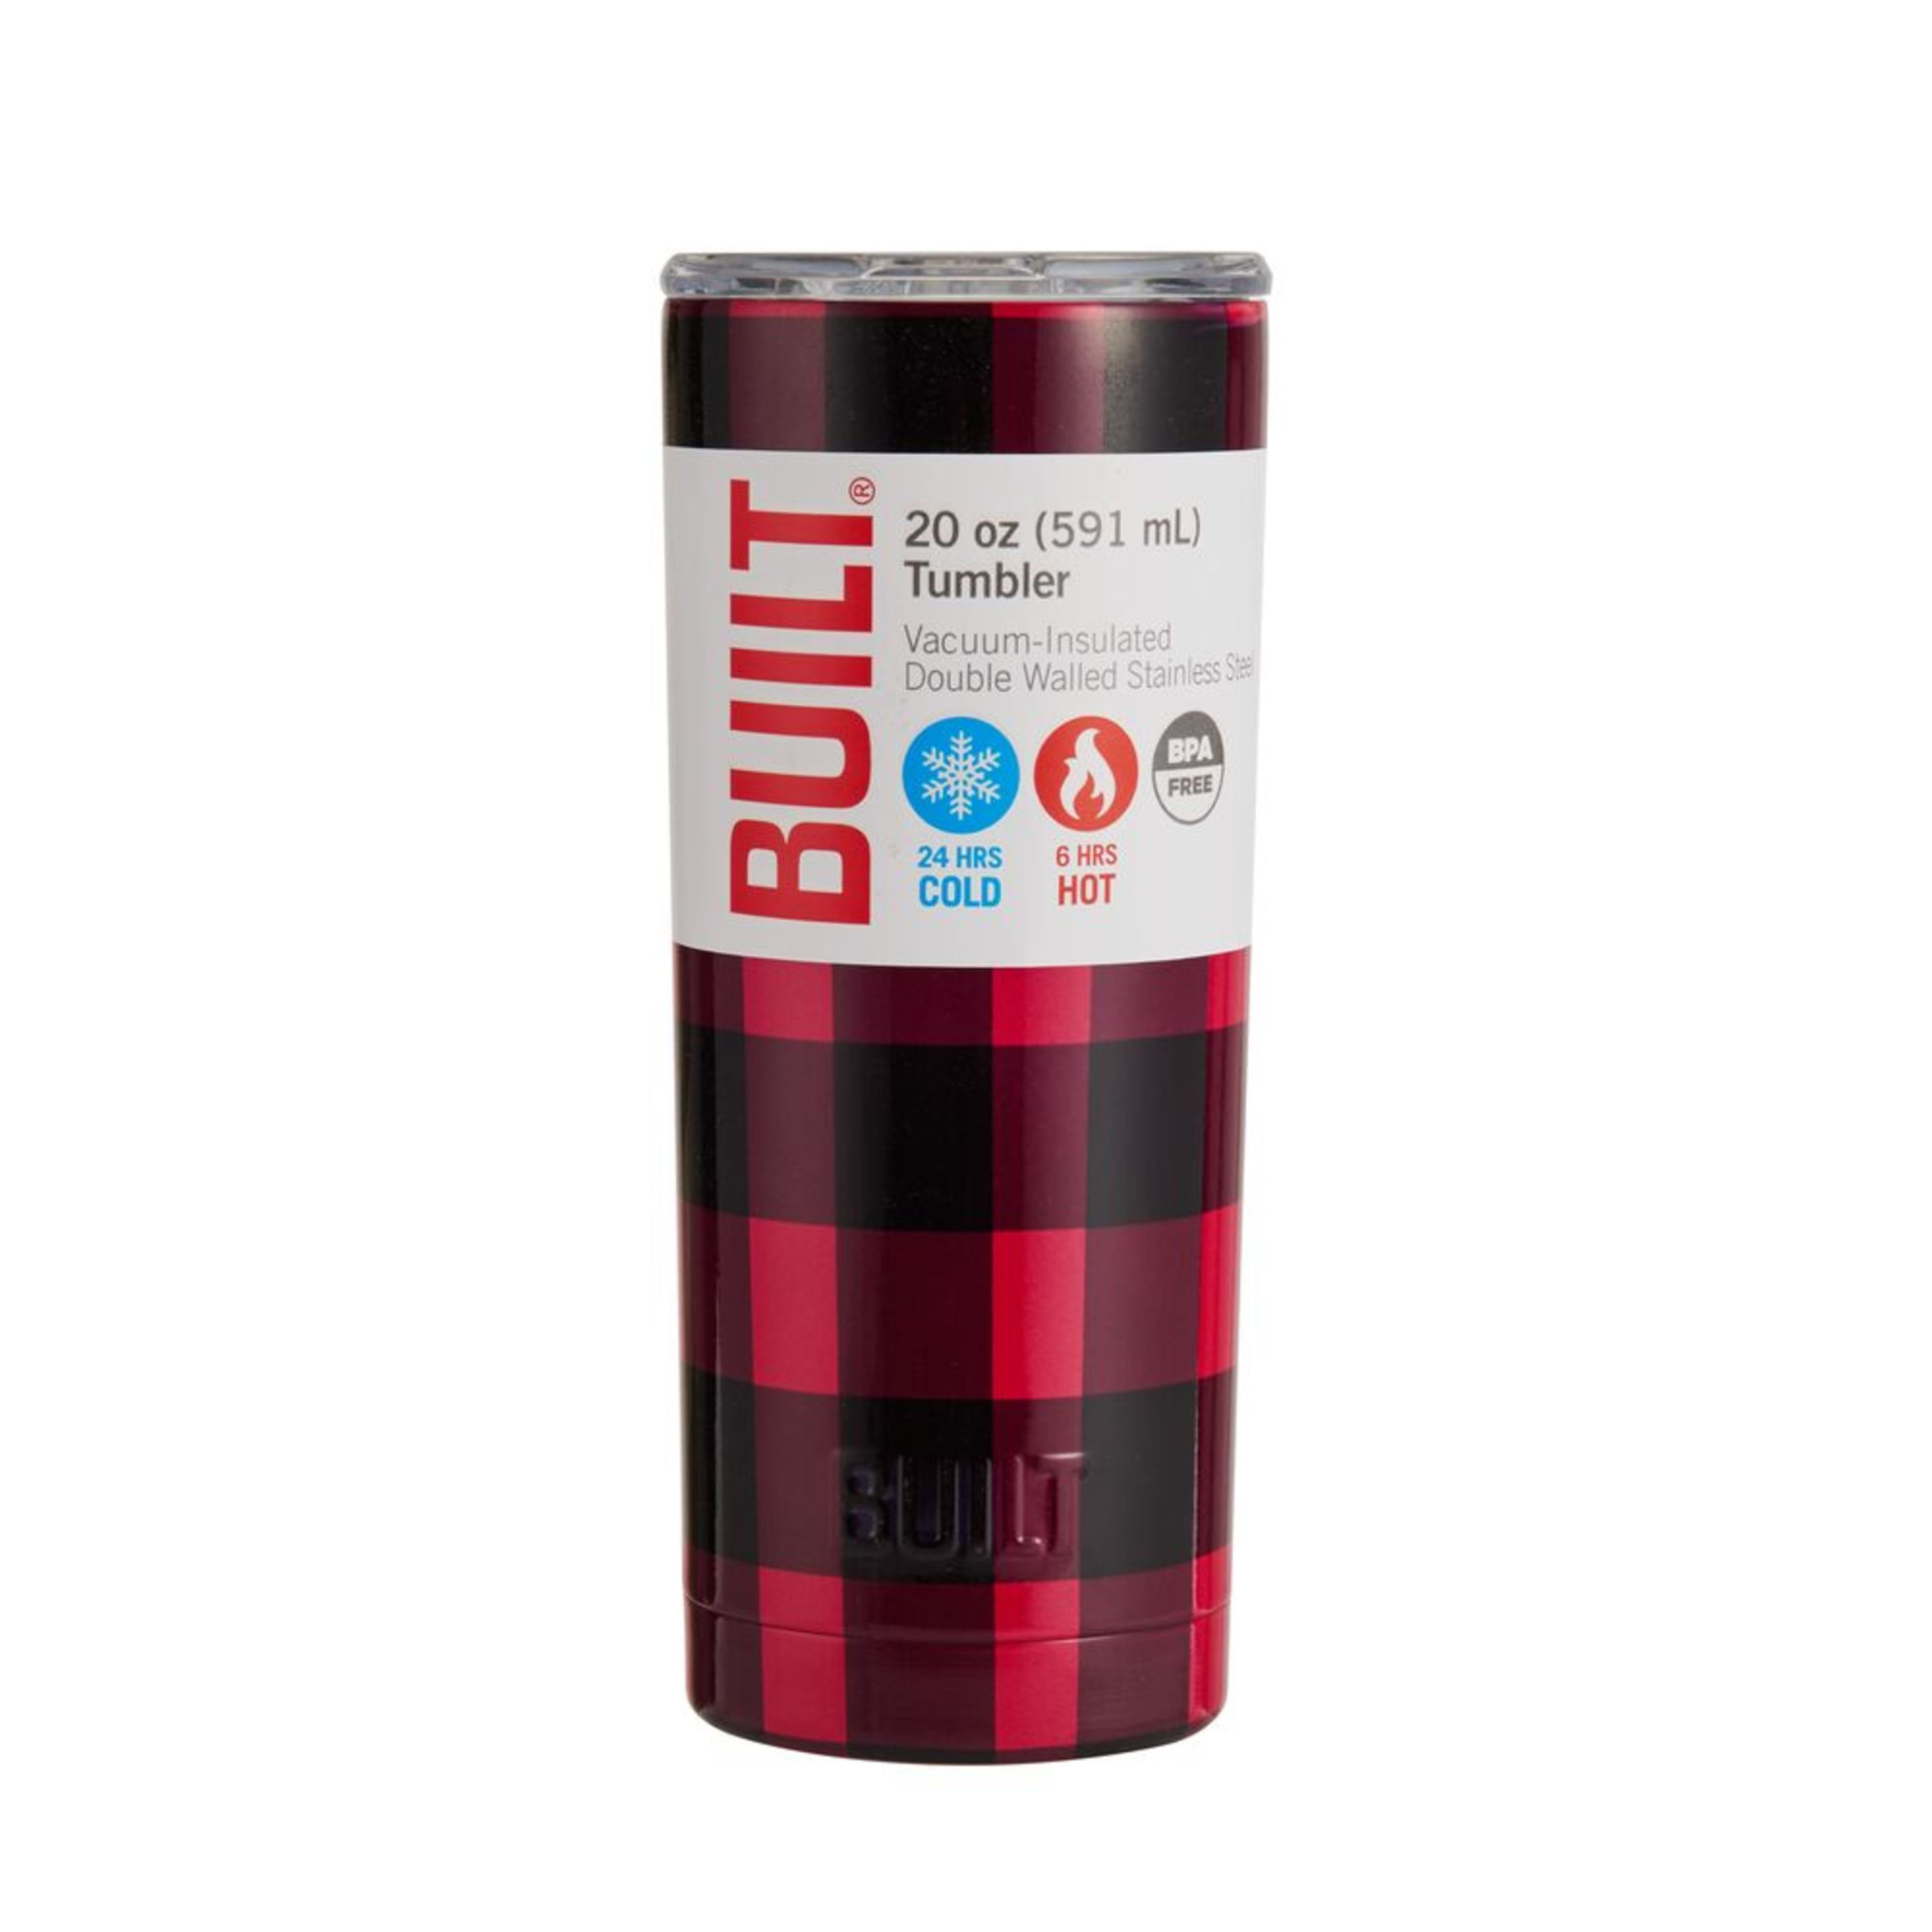 Promotional Glendale 20 oz Vacuum Insulated Stainless Steel Tumbler $10.52